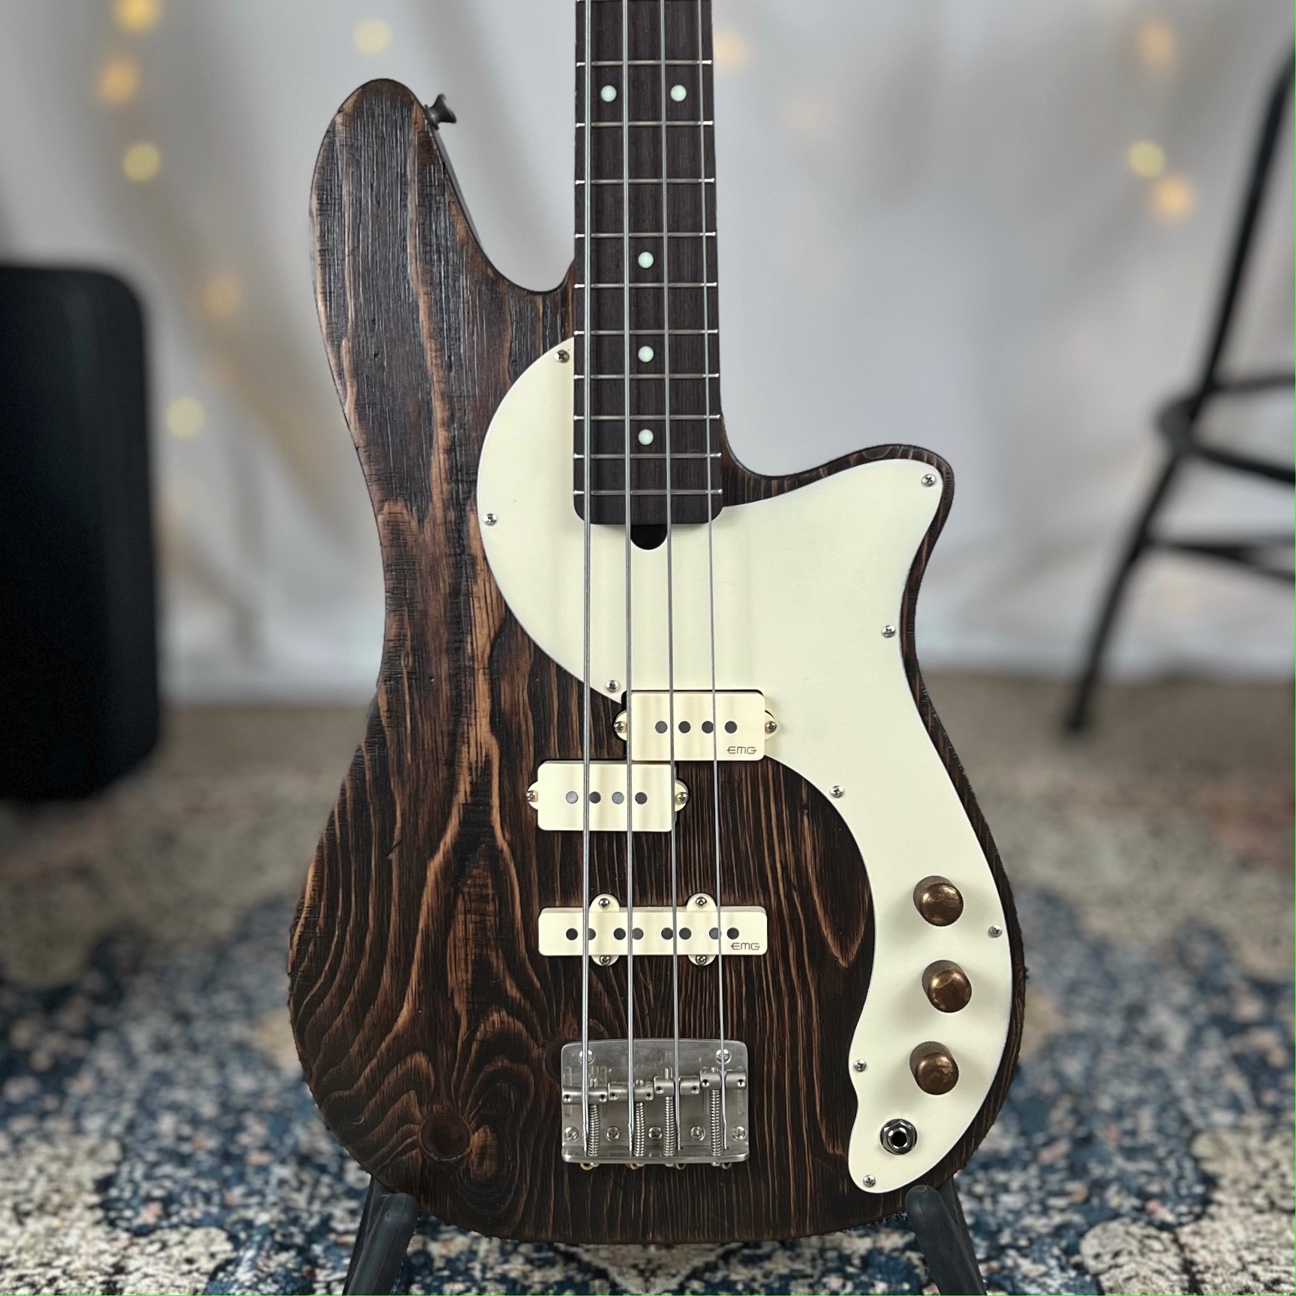 Roxie PJ 30" Short-Scale Bass in Charred Barrel Brown on Distressed Pine with EMG Geezer Butler PJ Pickup Set